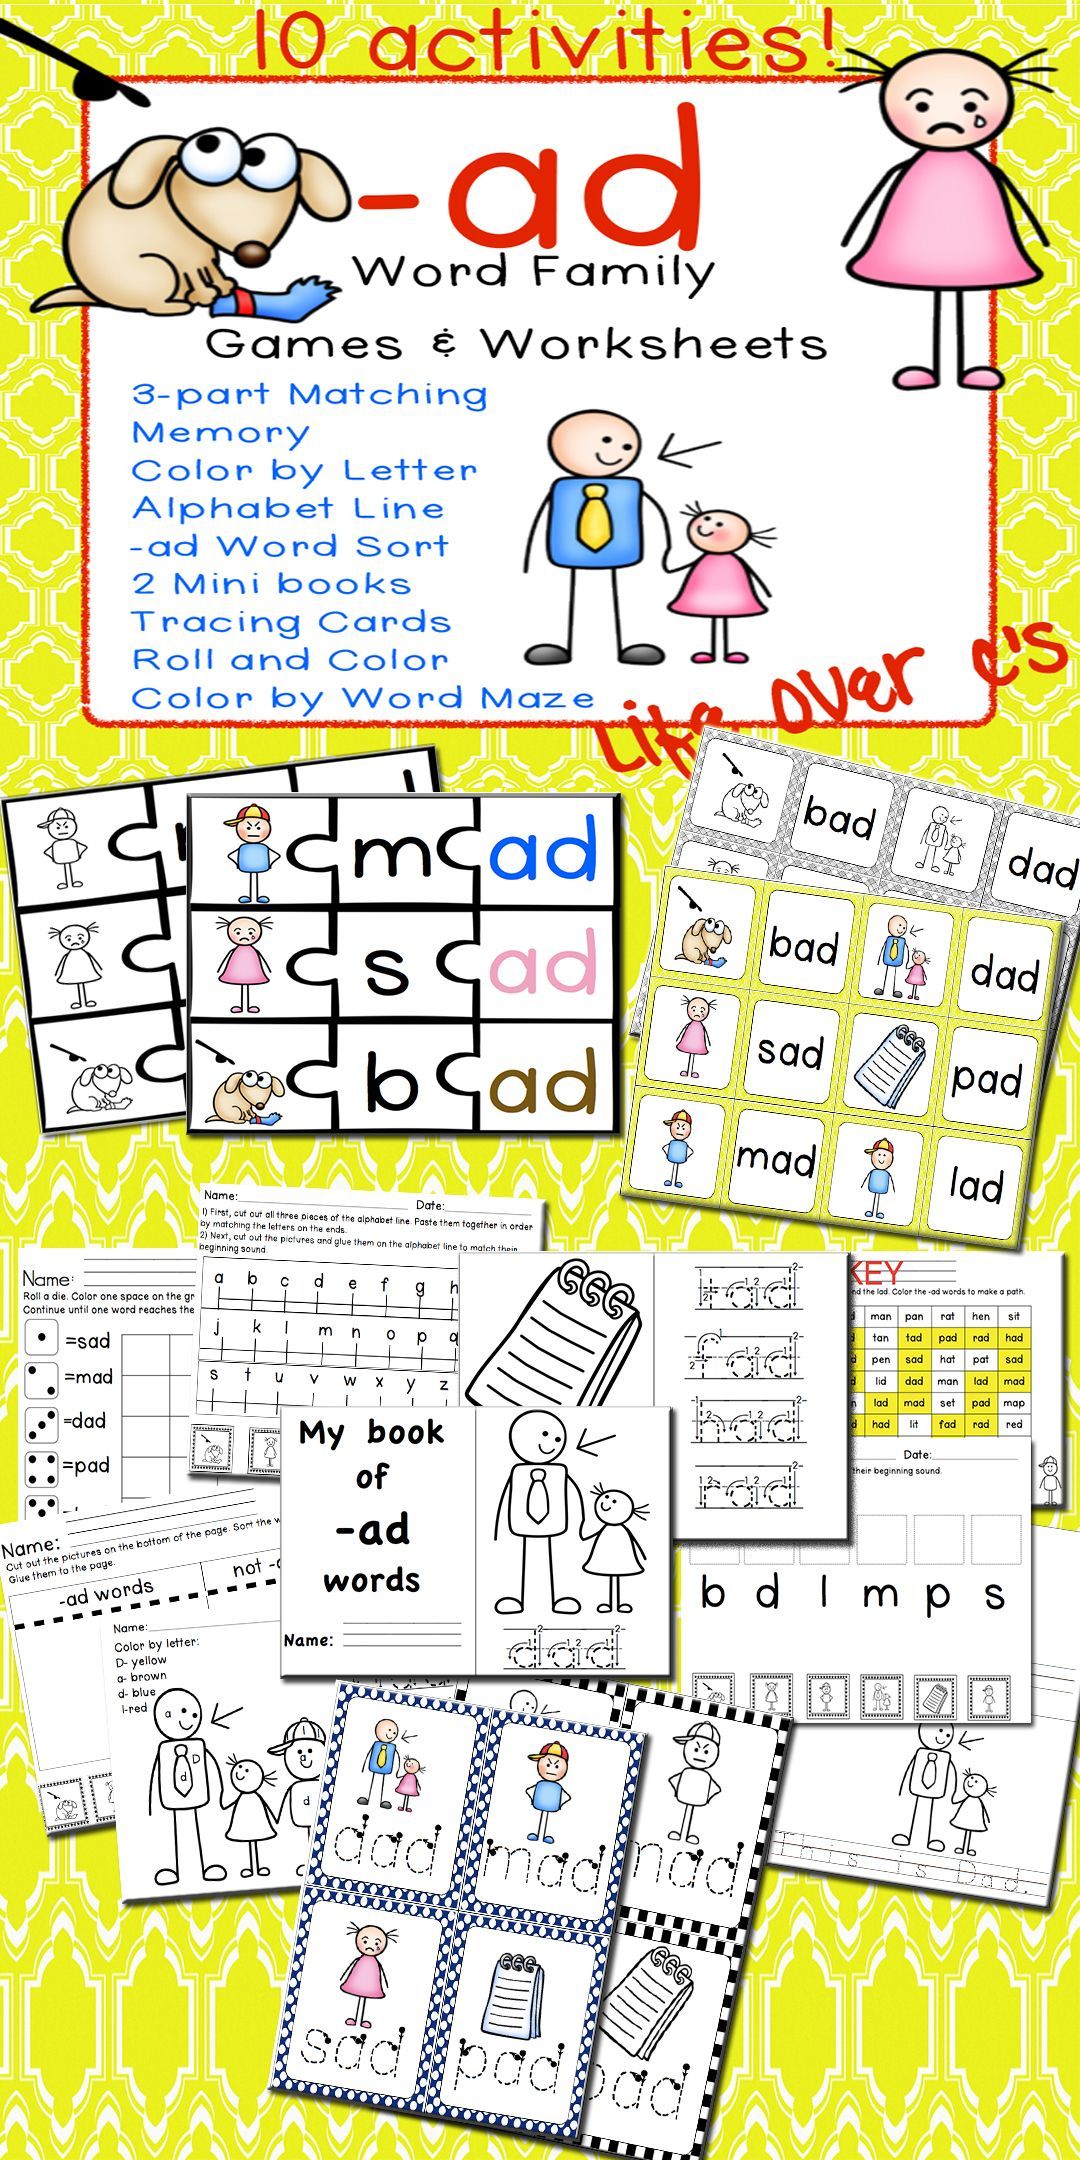 FREE! CVC -ad Word family: 10 engaging activities for students to learn the -ad